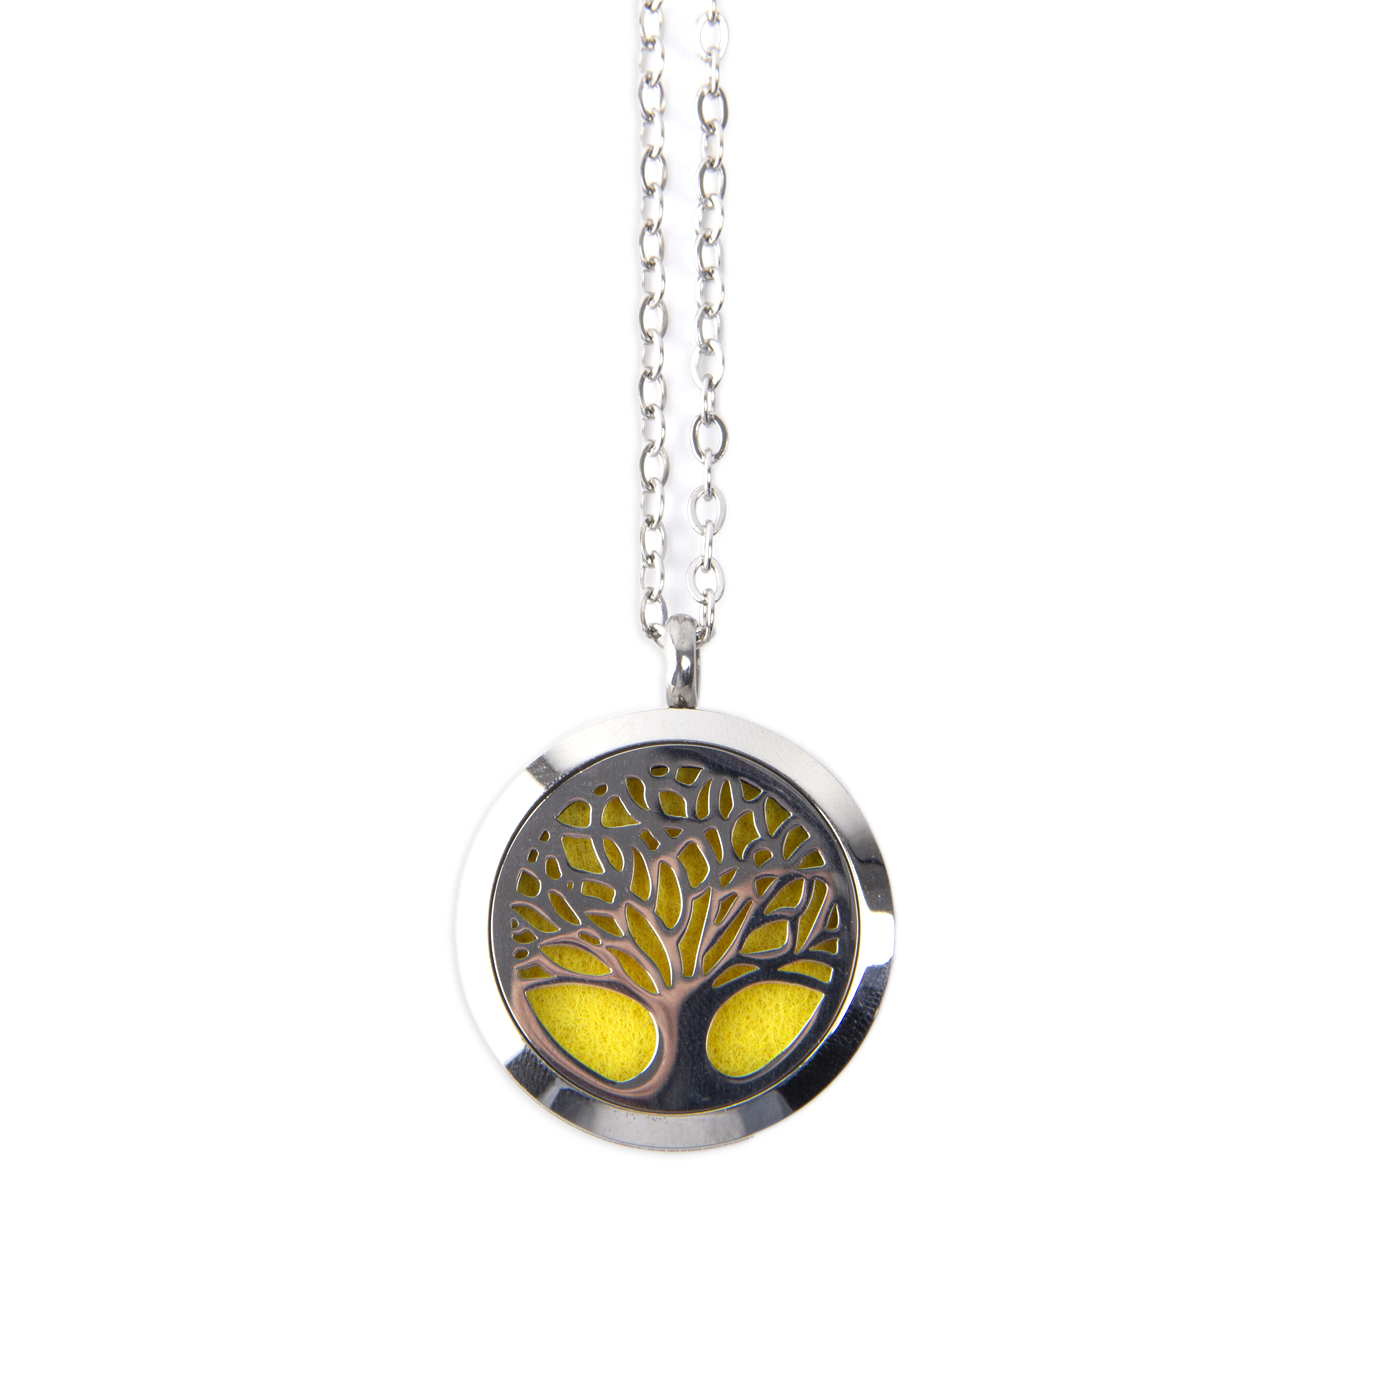 Stainless Steel Hollow Essential Oil Diffuser Necklace2